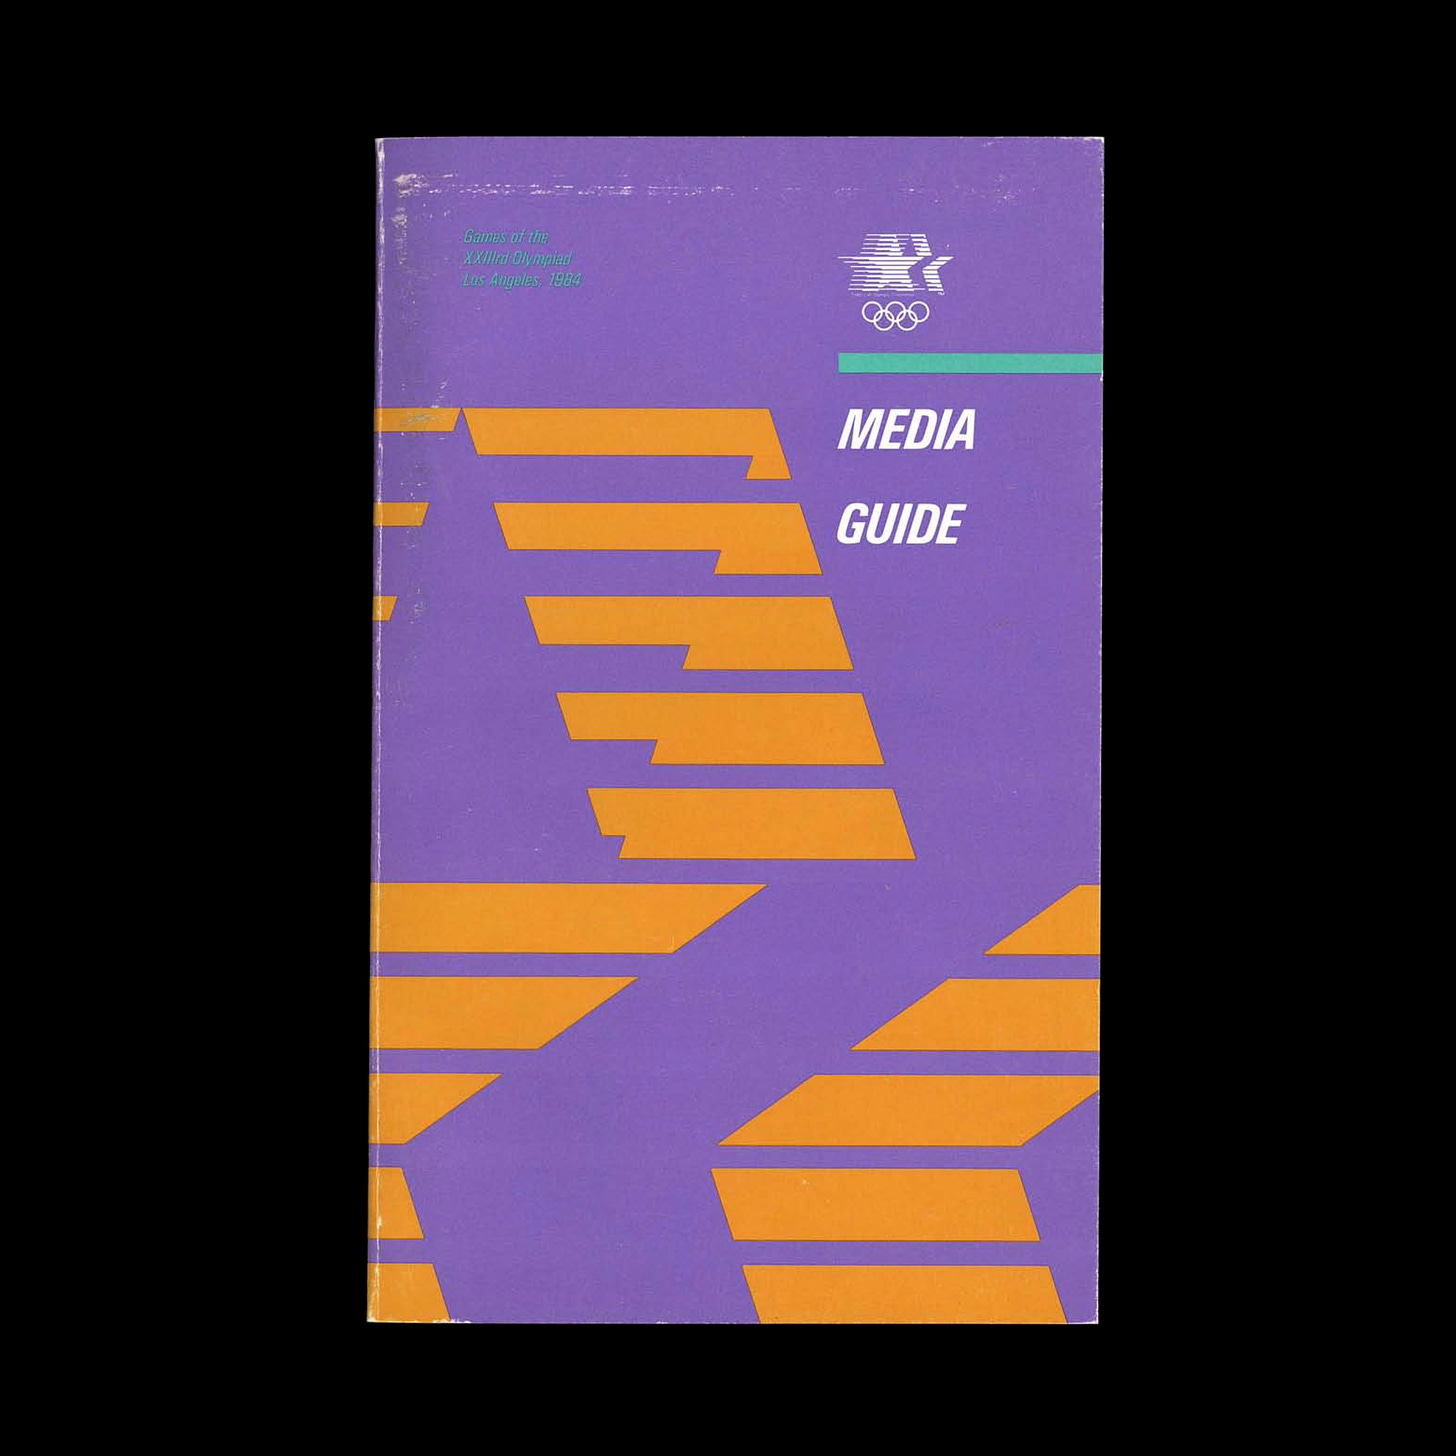 Media guide for the Los Angeles 1984 Olympic Games by Deborah Sussman